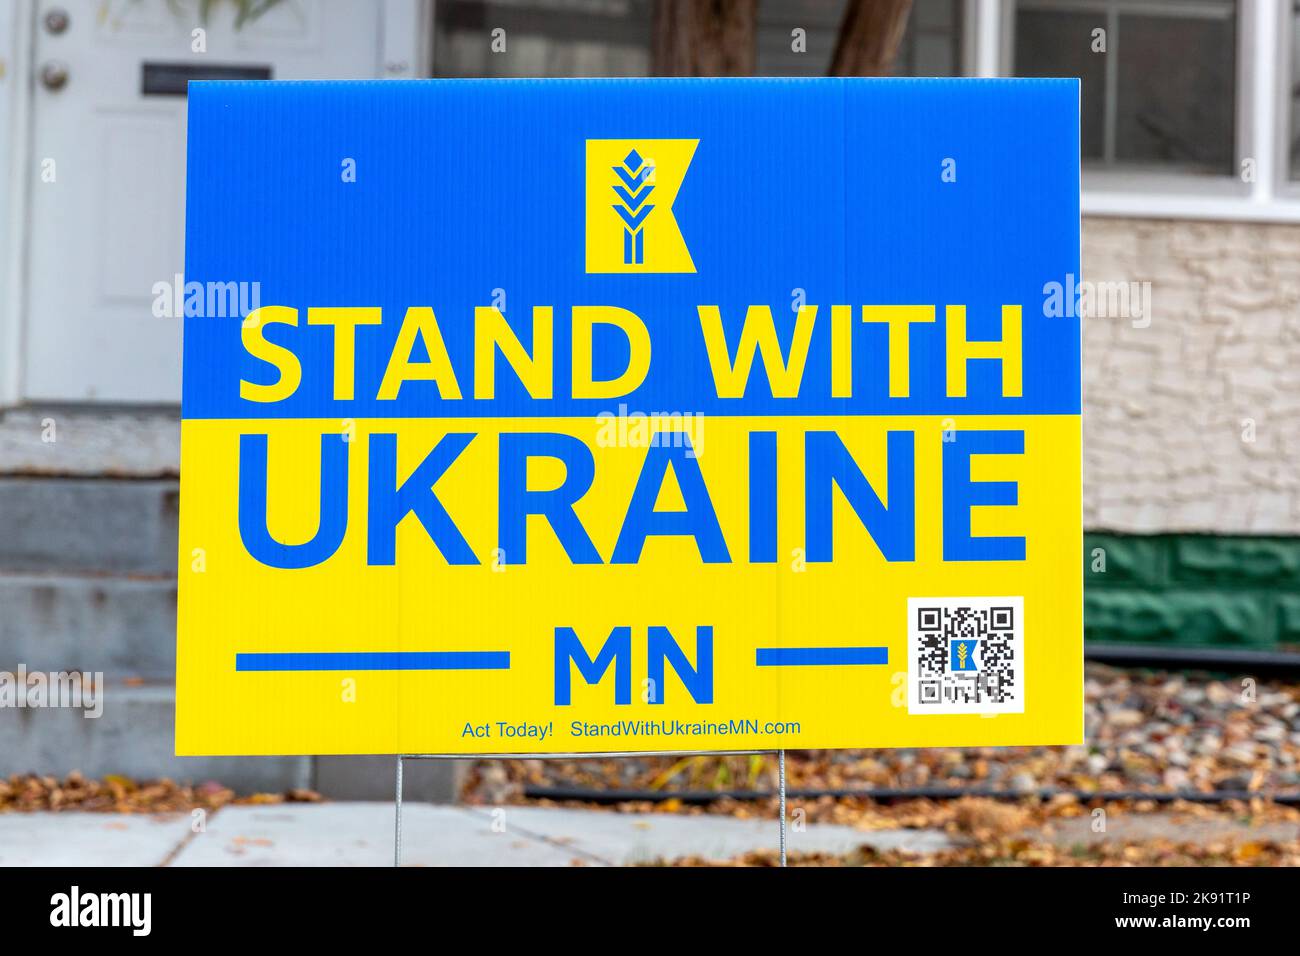 Colorful Minneapolis, Minnesota neighborhood yard sign in support and defense of Ukraine, Stand With Ukraine against Russia. Stock Photo